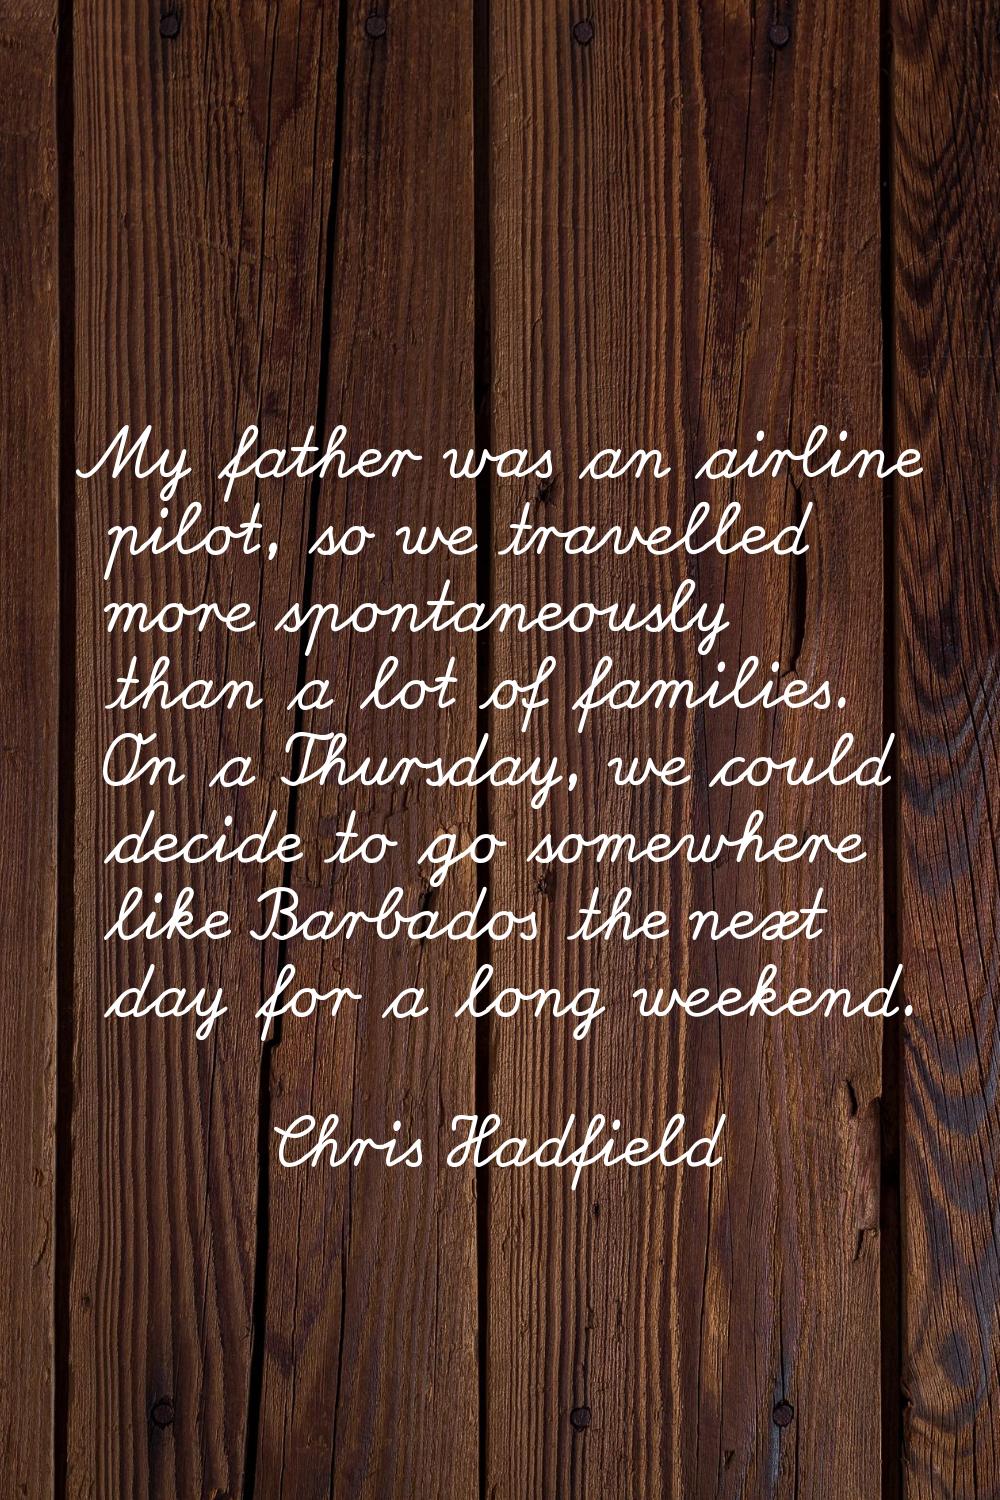 My father was an airline pilot, so we travelled more spontaneously than a lot of families. On a Thu